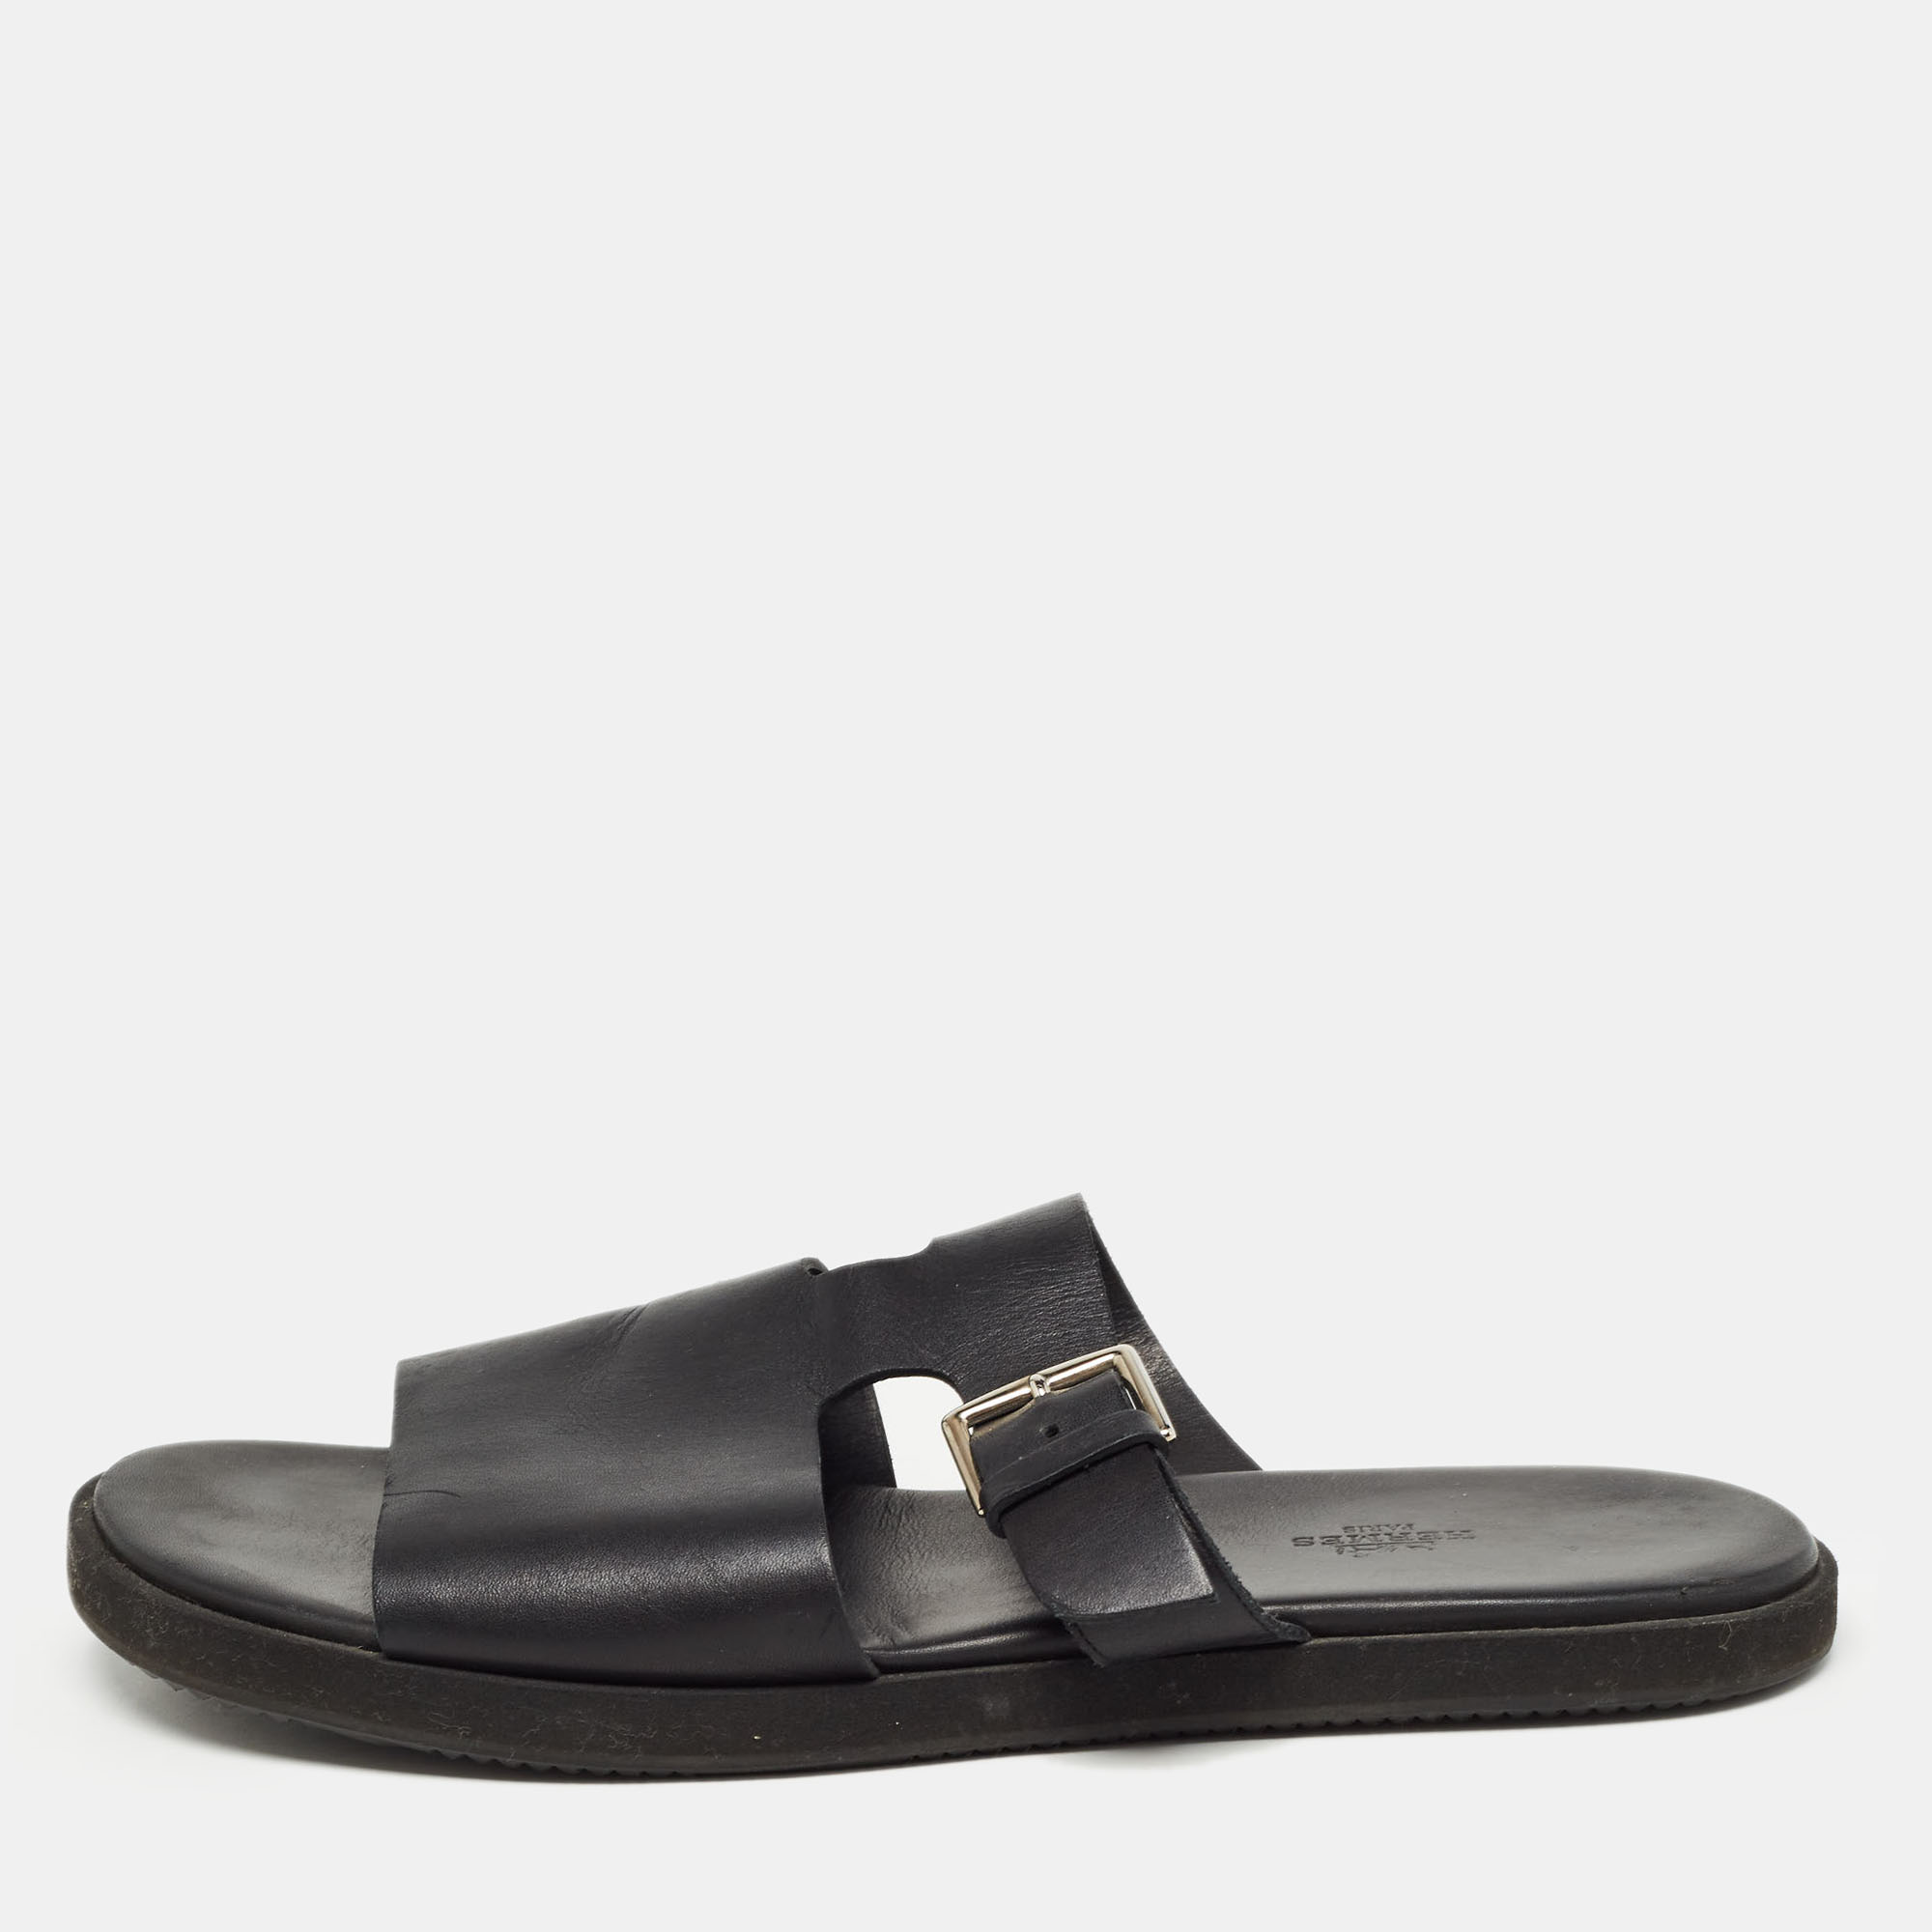 Pre-owned Hermes Black Leather Double Strap Slides Size 43